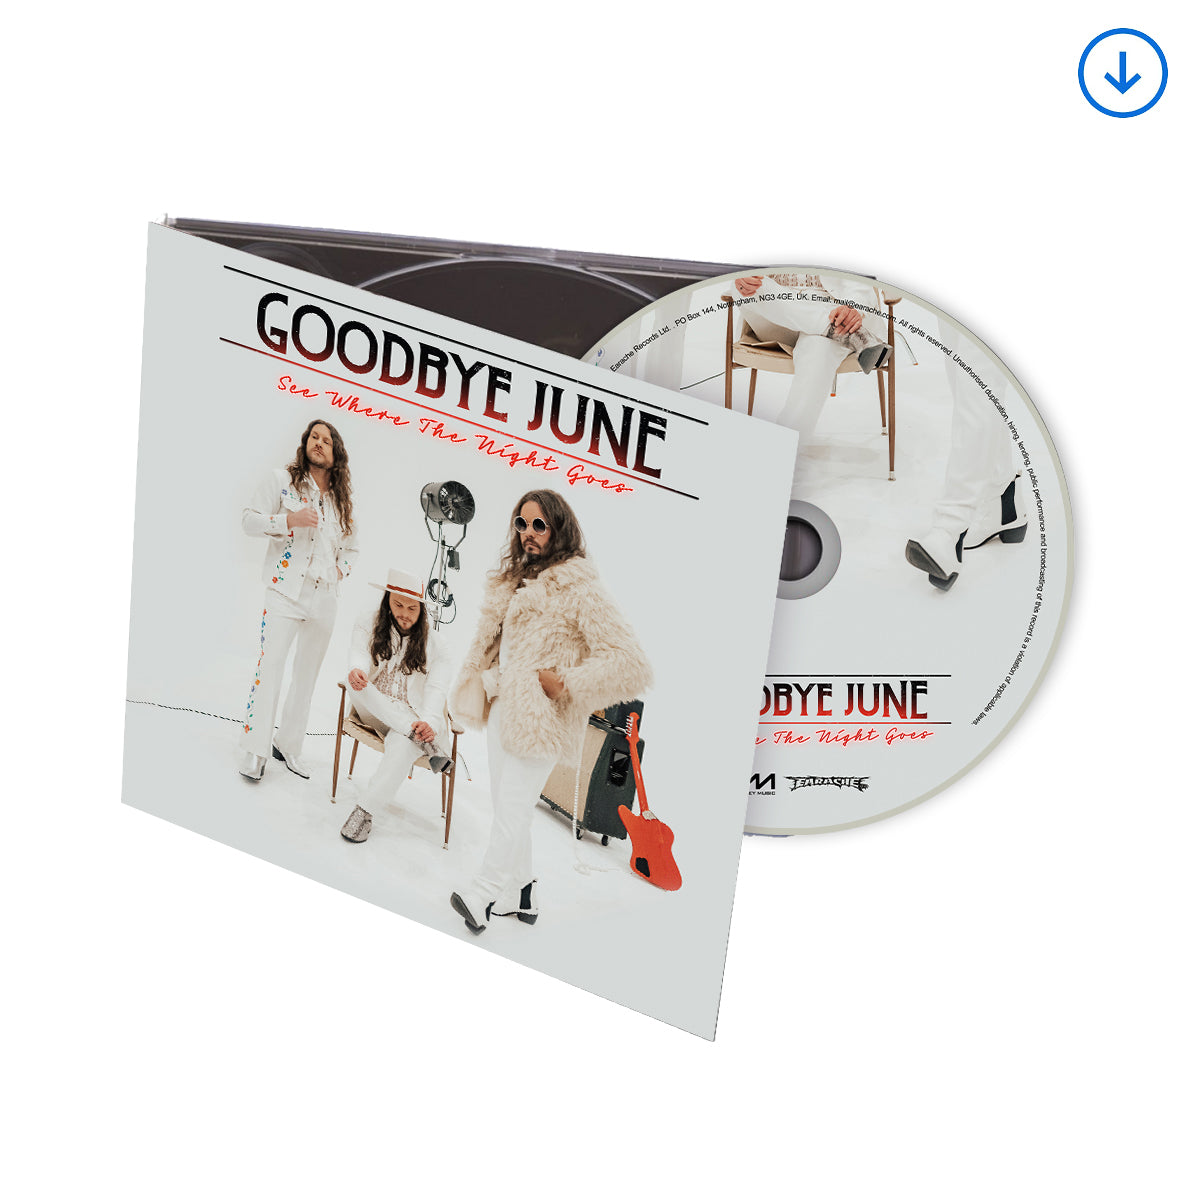 Goodbye June "See Where The Night Goes" CD